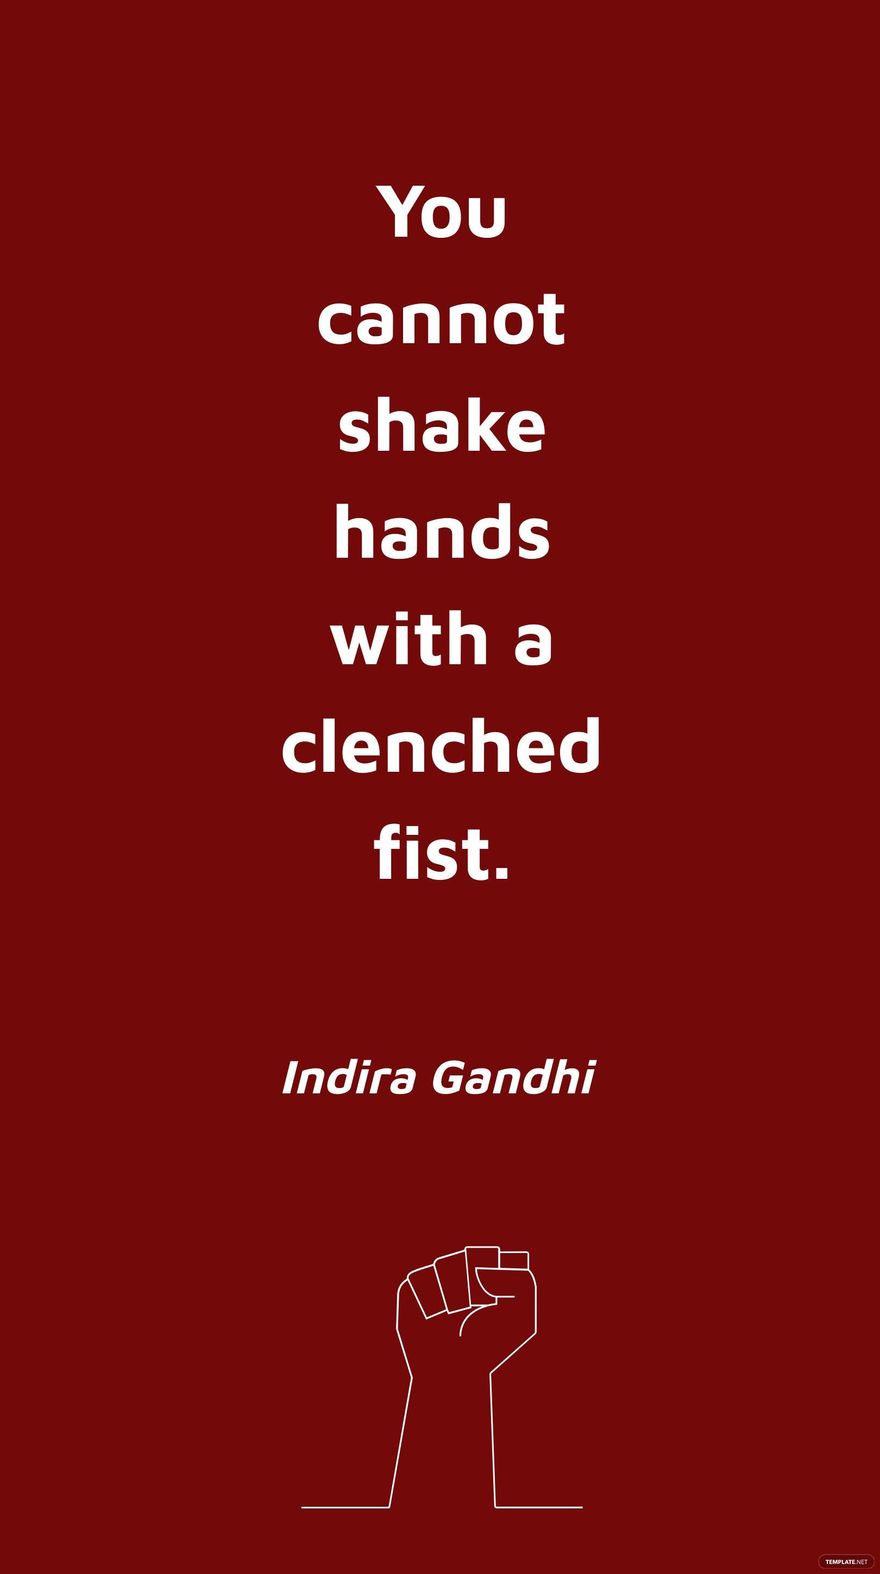 Free Indira Gandhi - You cannot shake hands with a clenched fist. in JPG